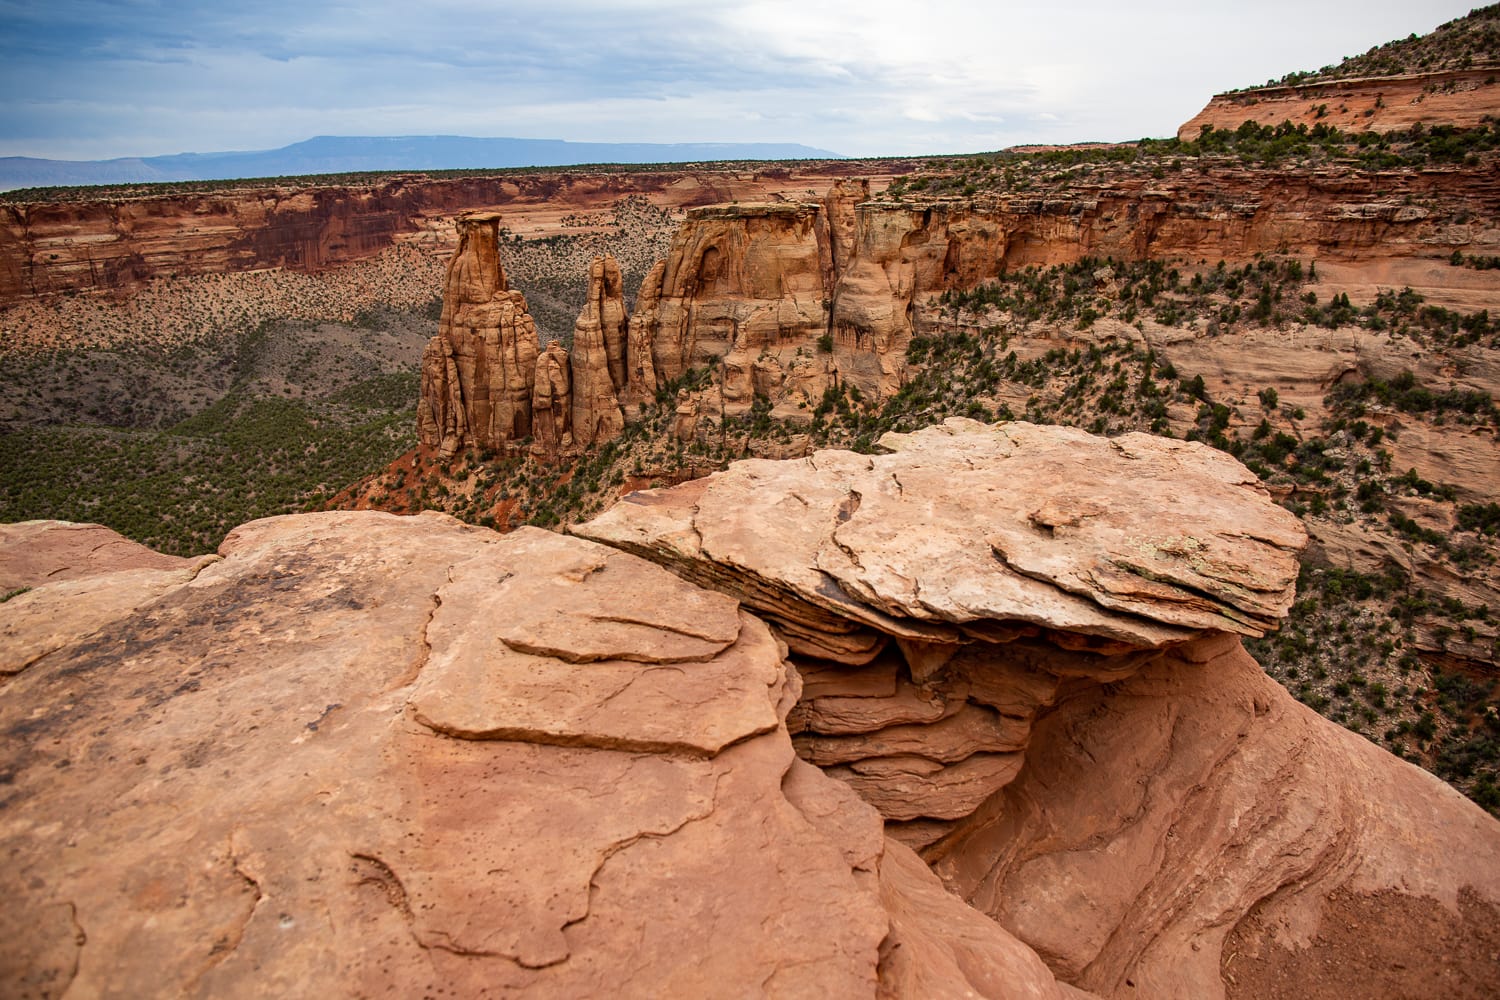 Layered reddish rocks in the foreground of a view of the dramatic Colorado National Monument canyon.